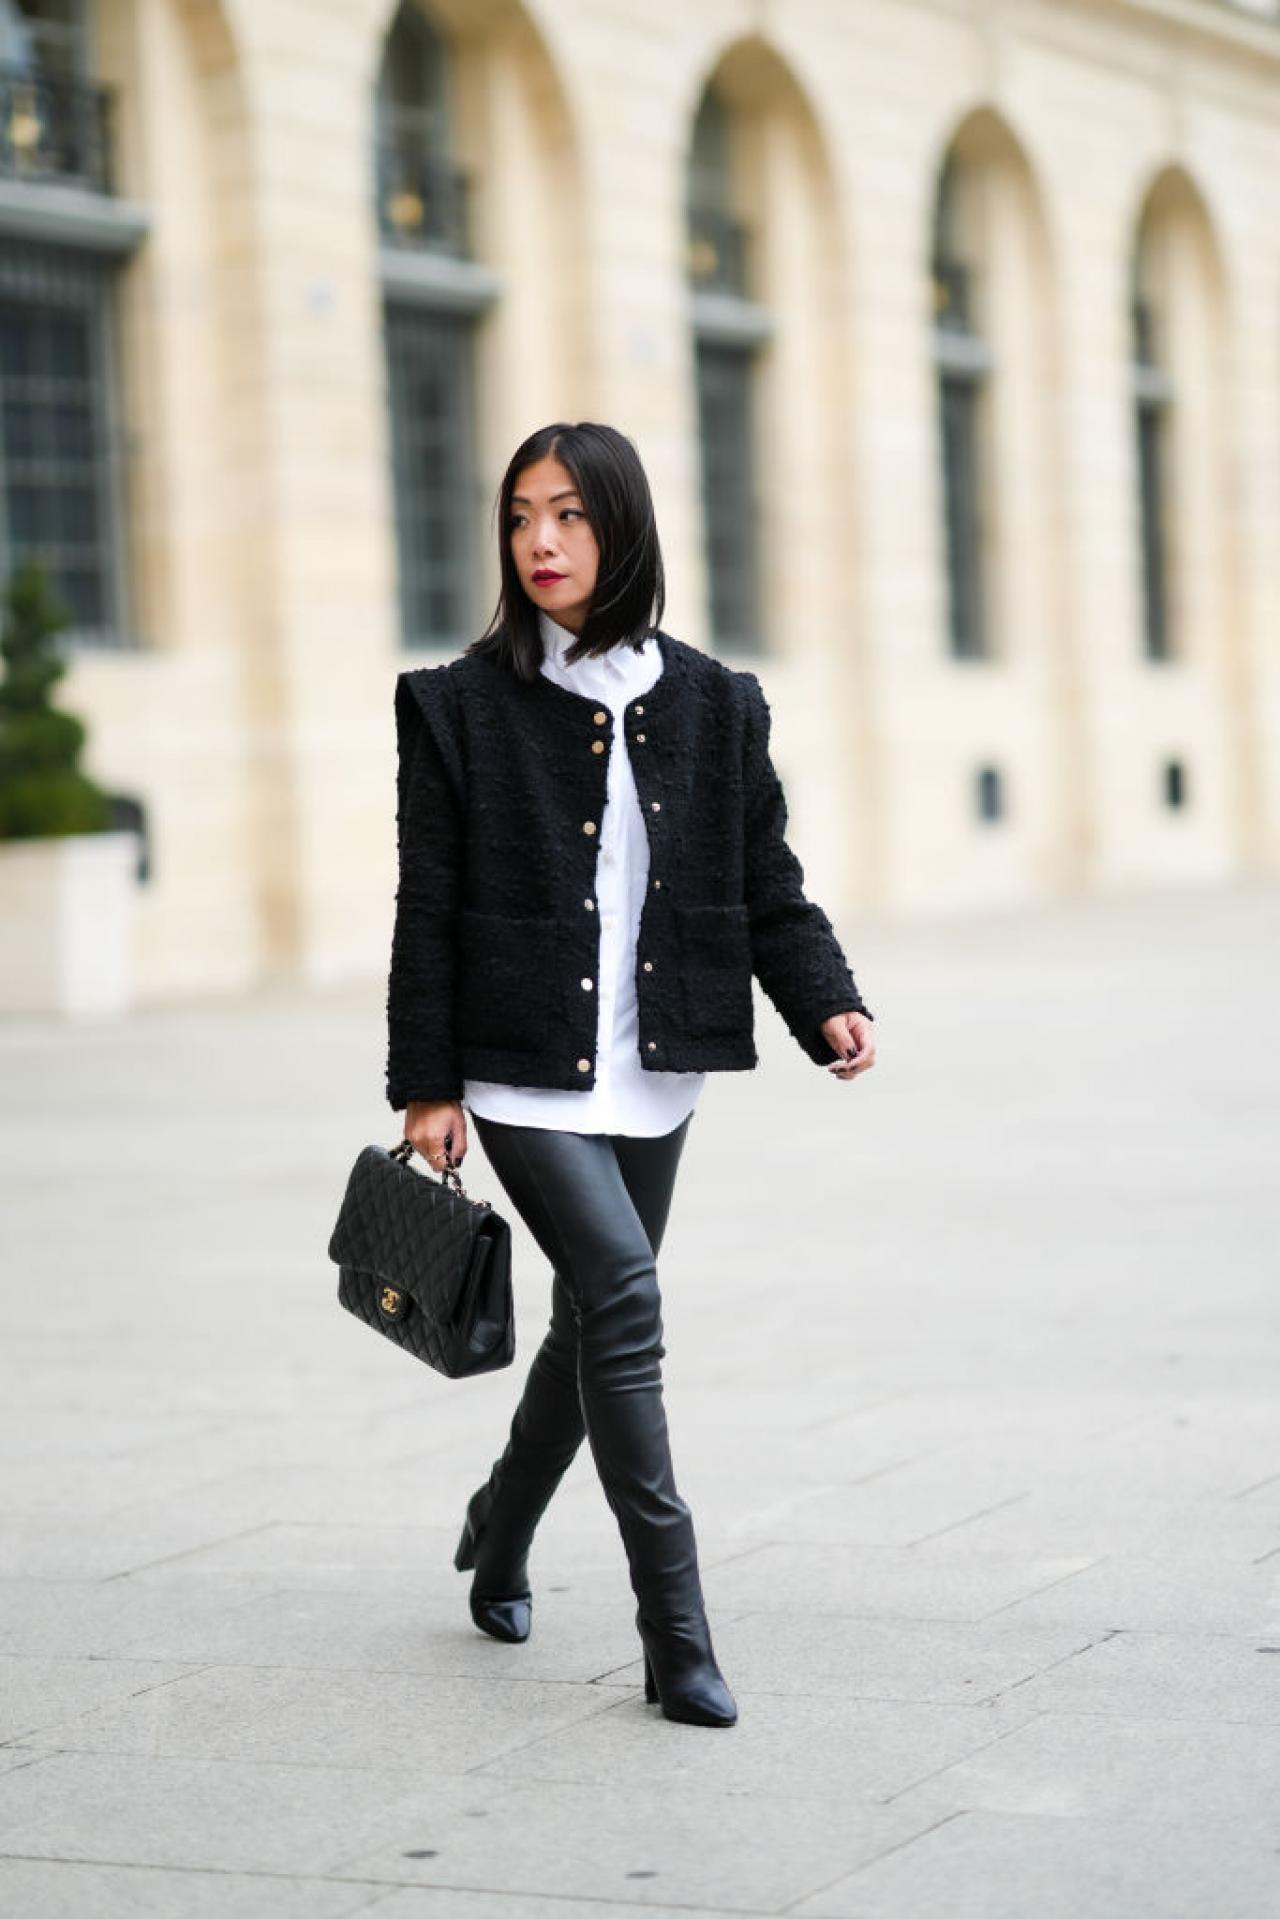 PARIS, FRANCE - OCTOBER 01: May Berthelot wears a white shirt, a black tweed jacket with epaulets, black shiny leather skinny pants, a black shiny leather Chanel handbag, a silver ring, a gold Juste Un Clou ring form Cartier, black shiny leather pointed block heels ankle boots from Yves Saint Laurent / YSL, during Paris Fashion Week - Womenswear Spring Summer 2022, on October 01, 2021 in Paris, France. (Photo by Edward Berthelot/Getty Images)